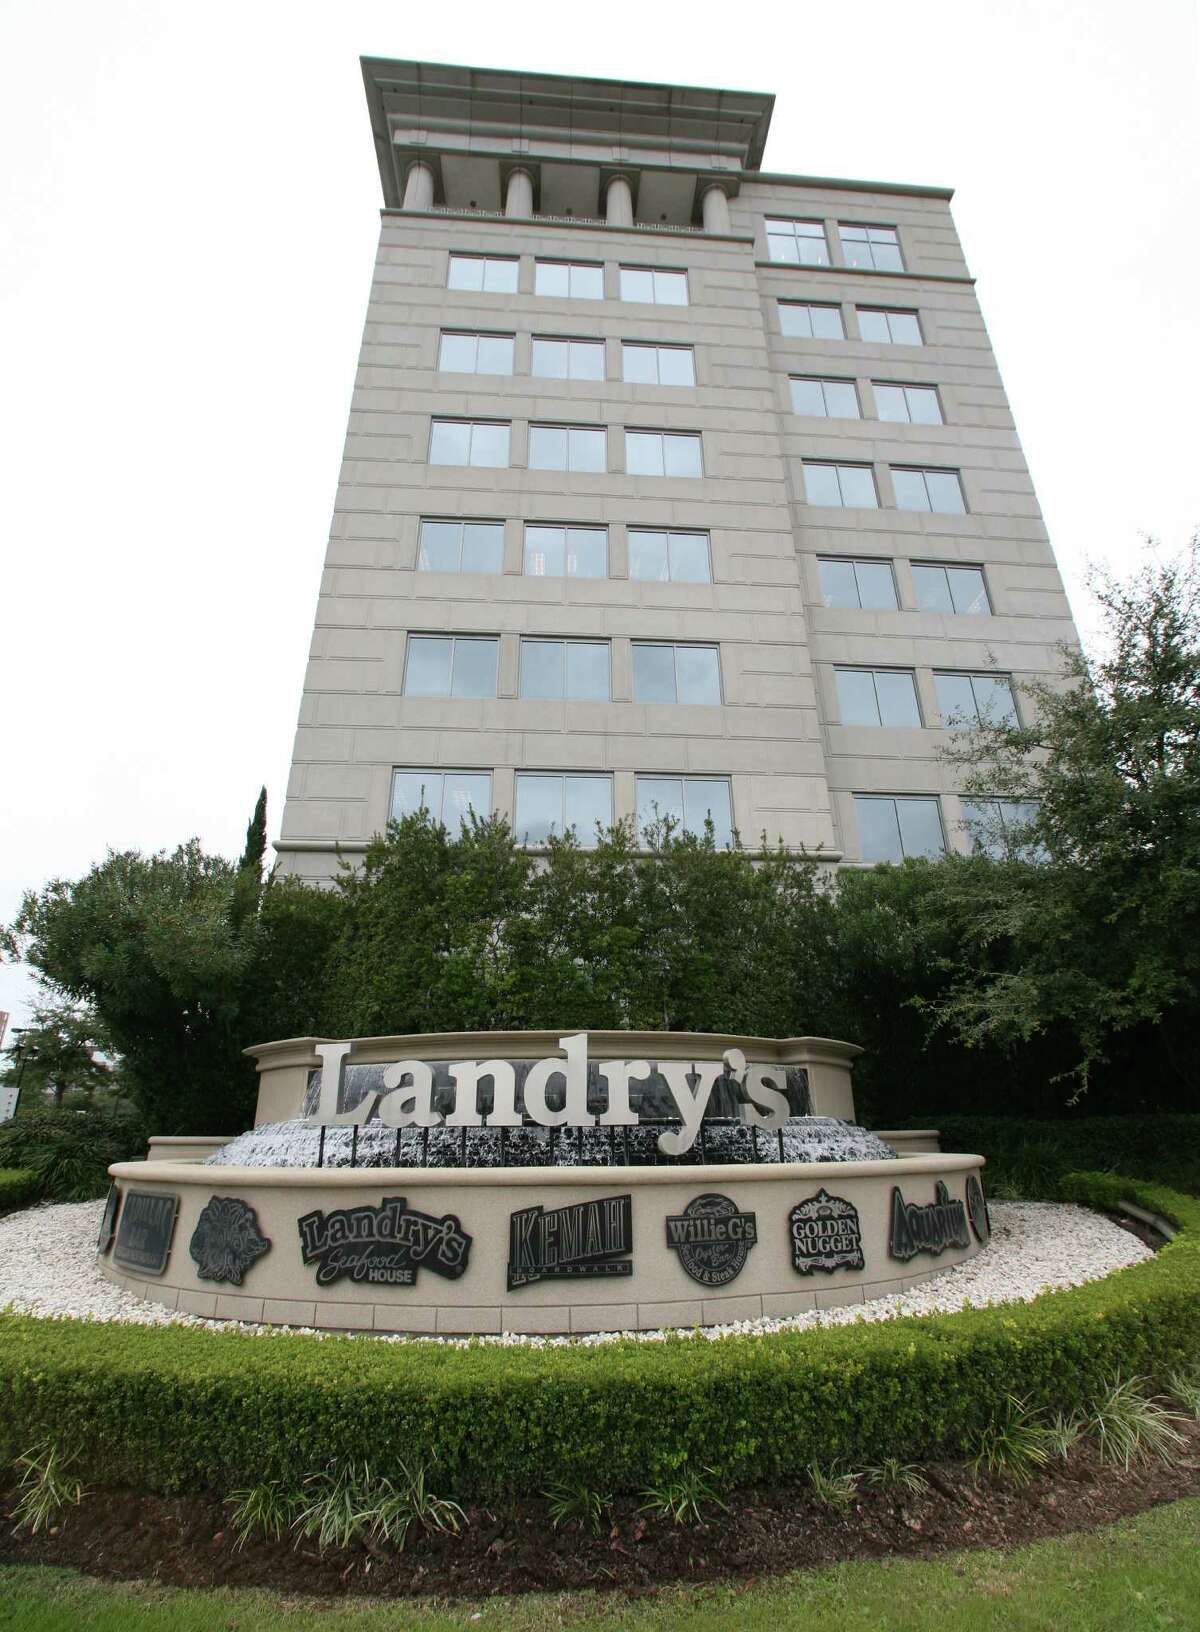 Fertitta's Houston-based company Landry's, Inc. boasts more than 600 concepts nationwide including over 60 brands, four aquariums, 11 hotels and two amusement parks.  